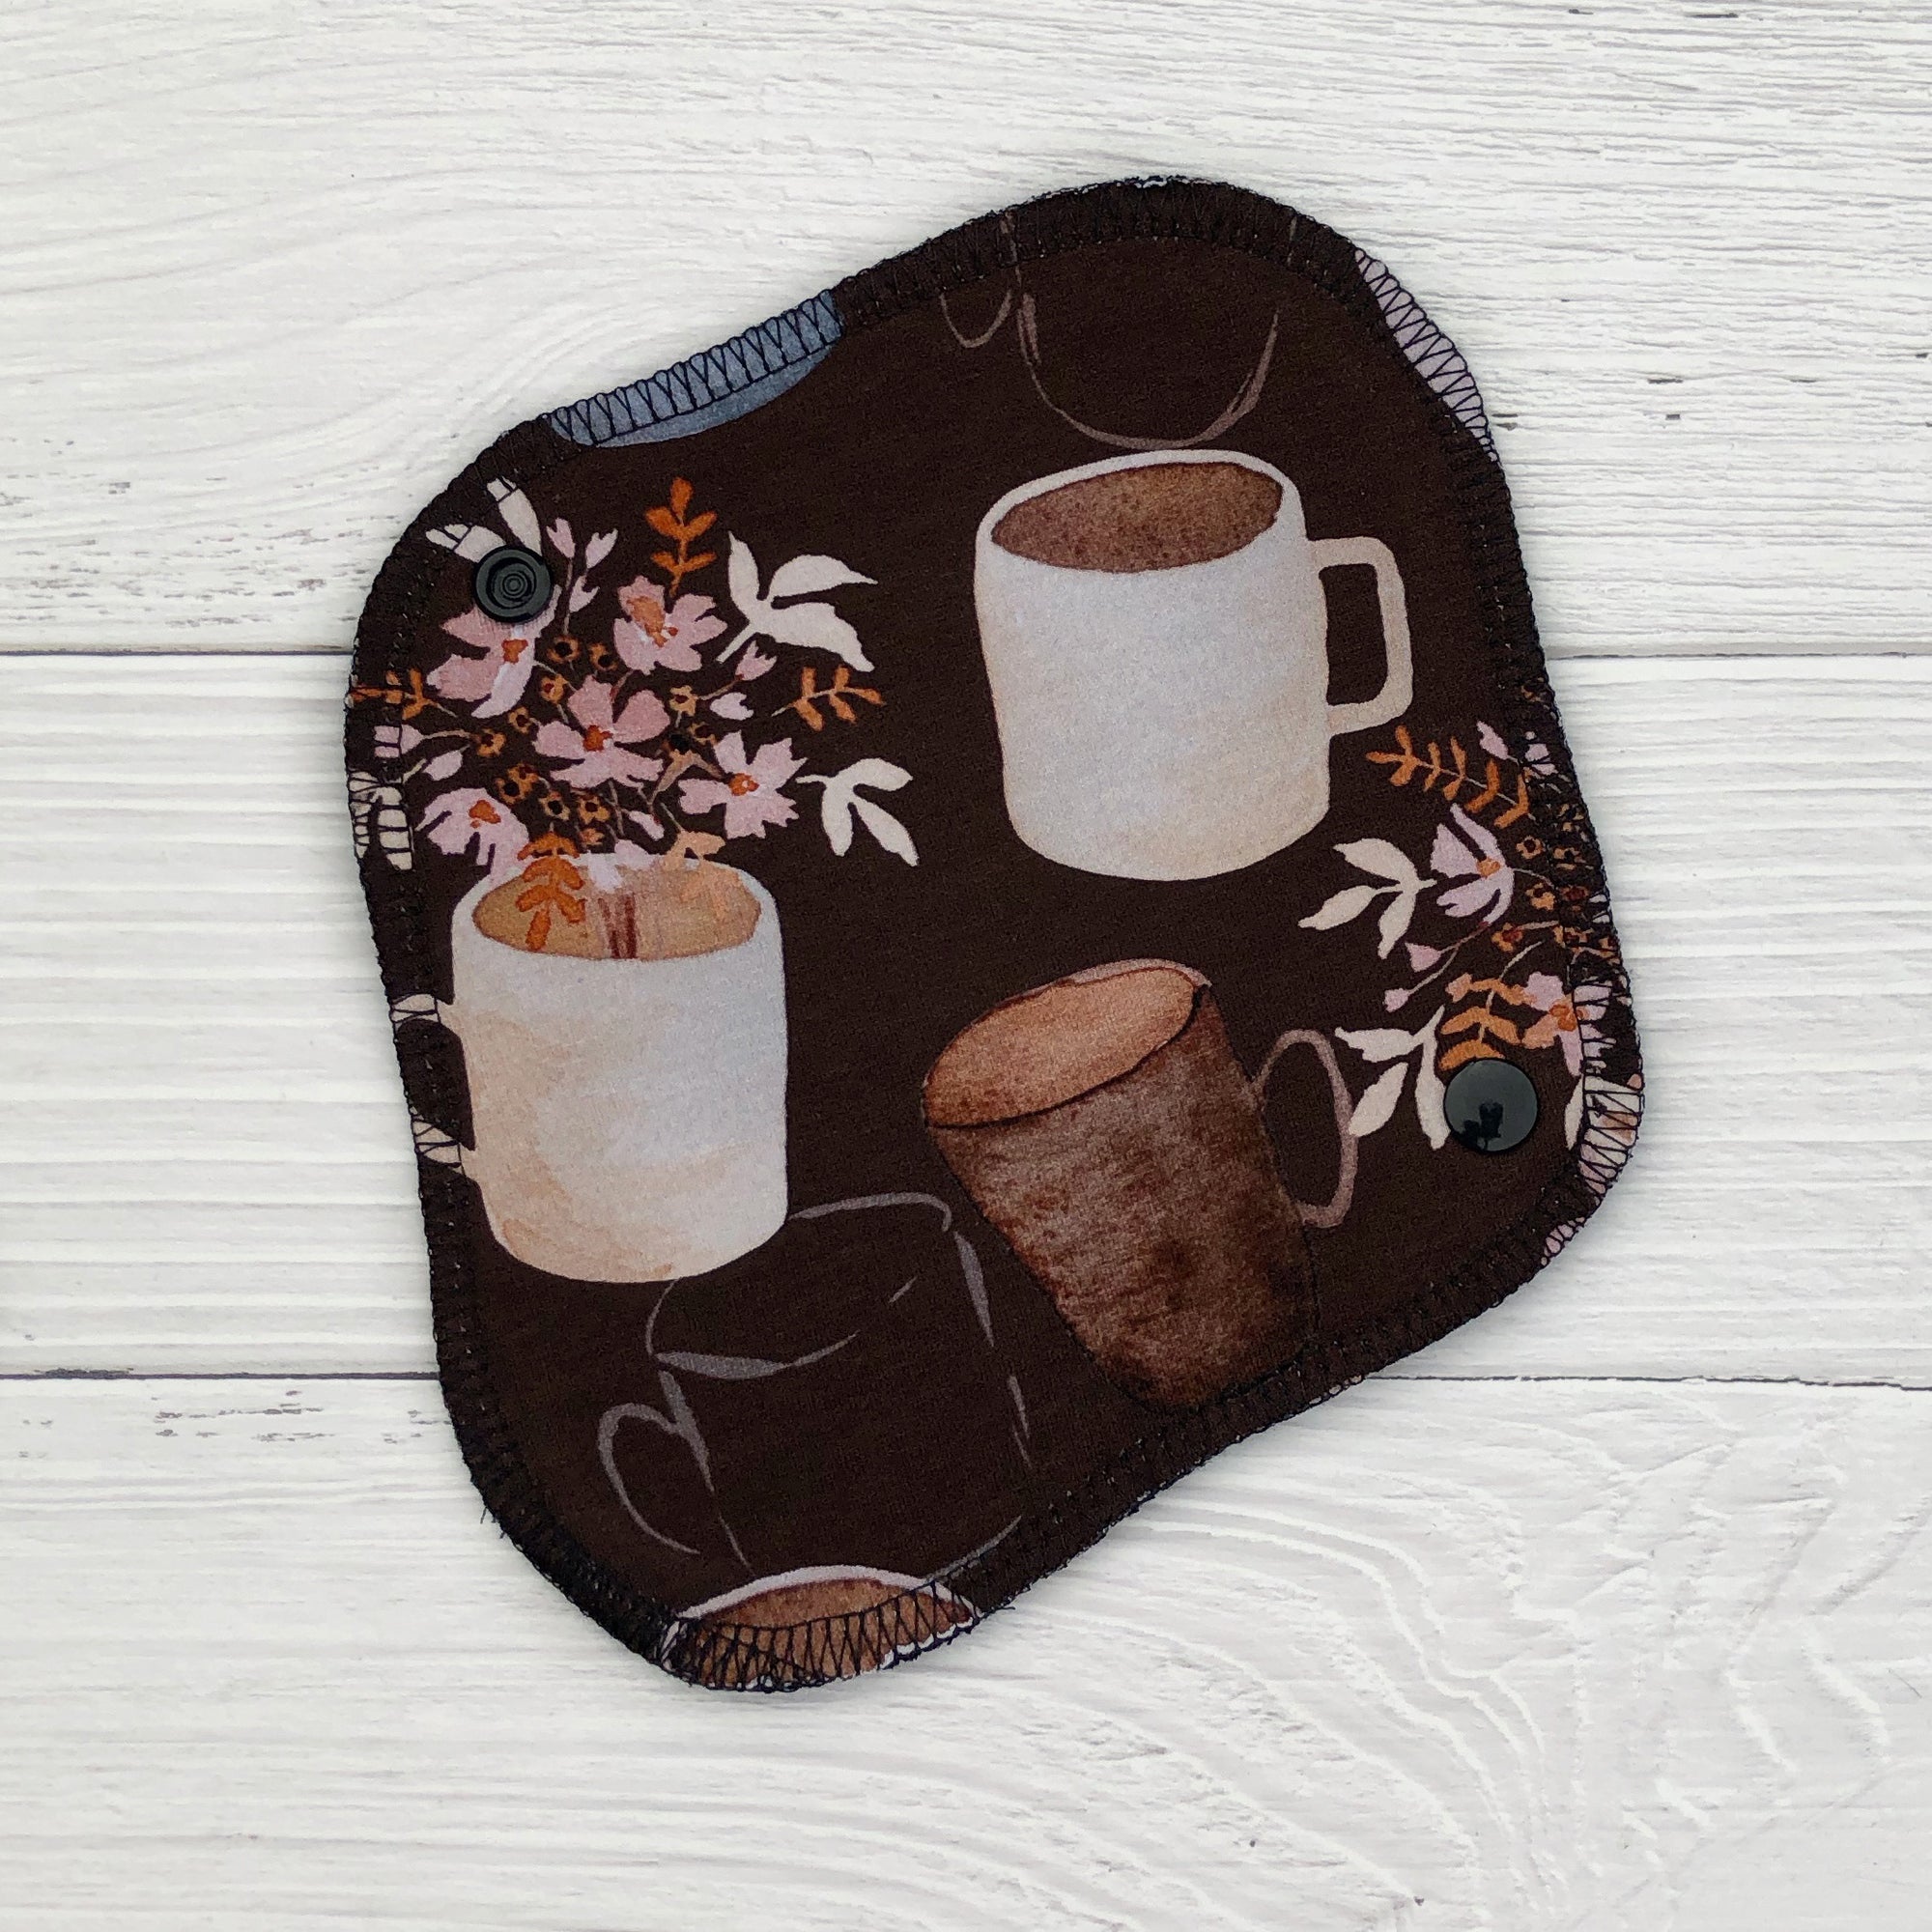 reusable pantyliner in a coffee and floral print on a white wood background